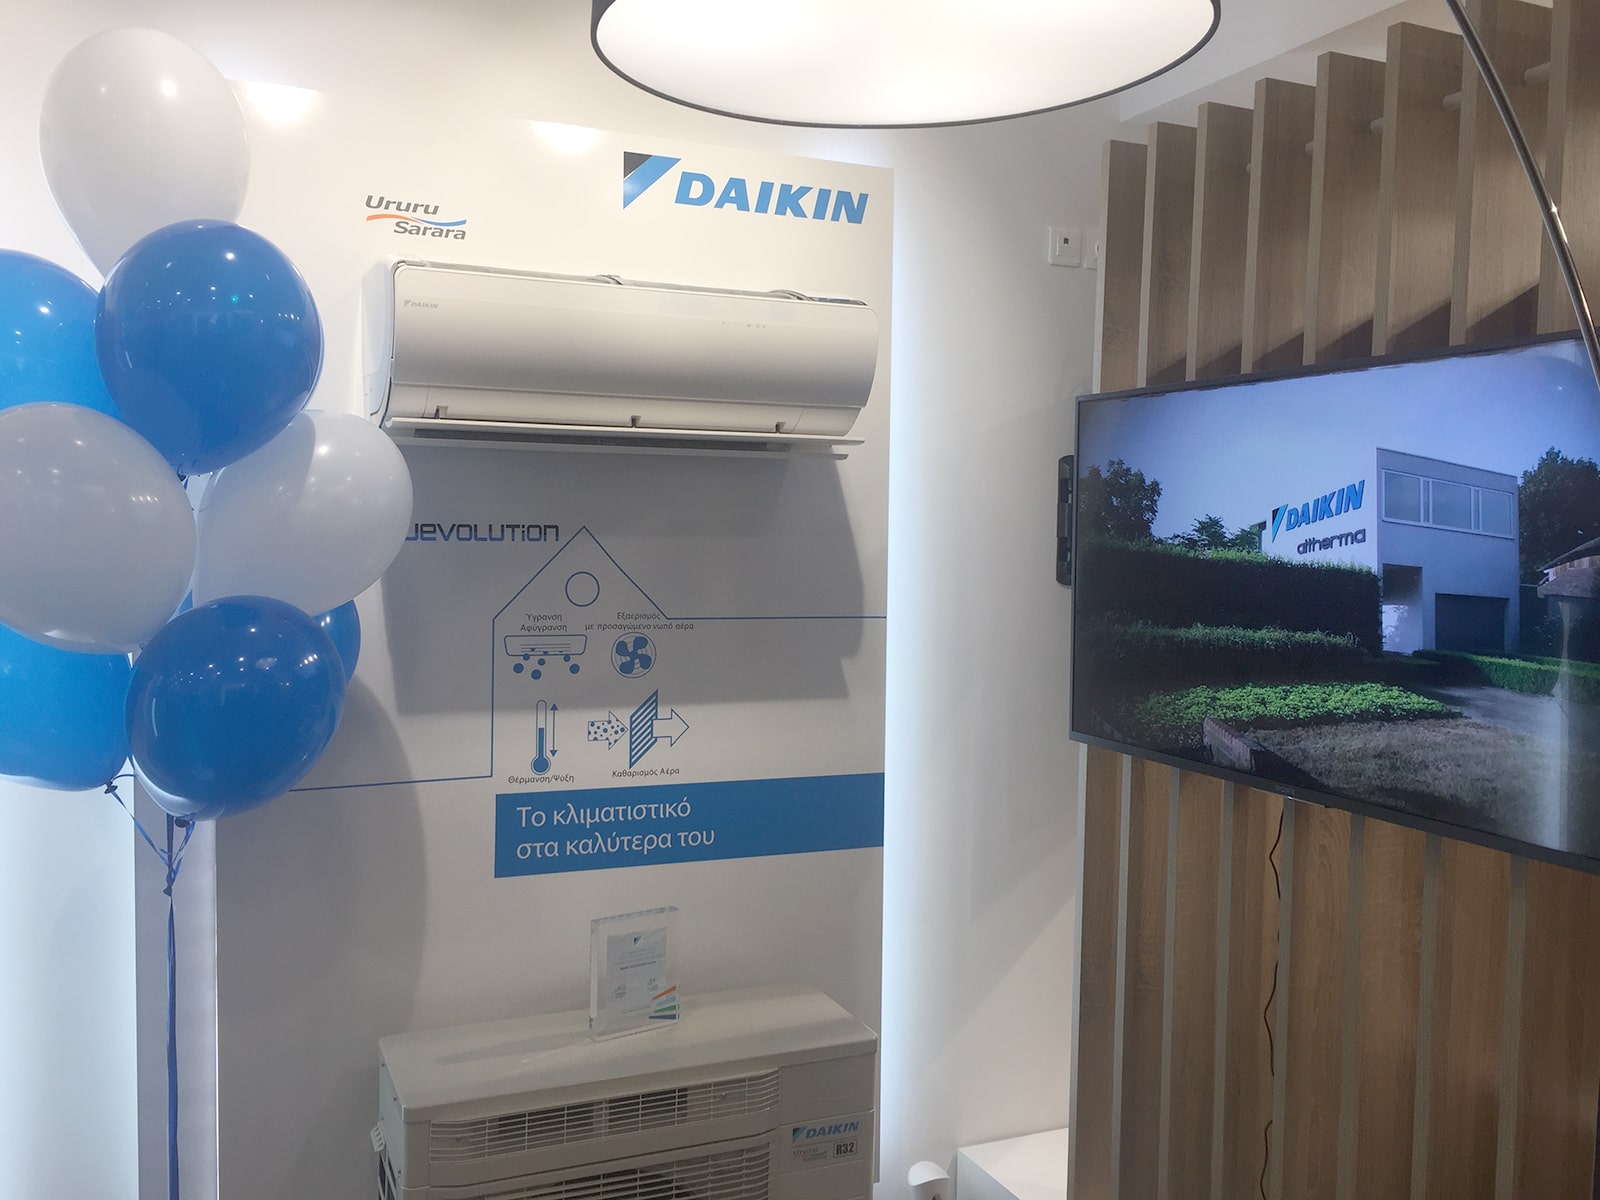 Daikin's Blue Dealer+ store is one of the many retail concepts developed by Stirixis